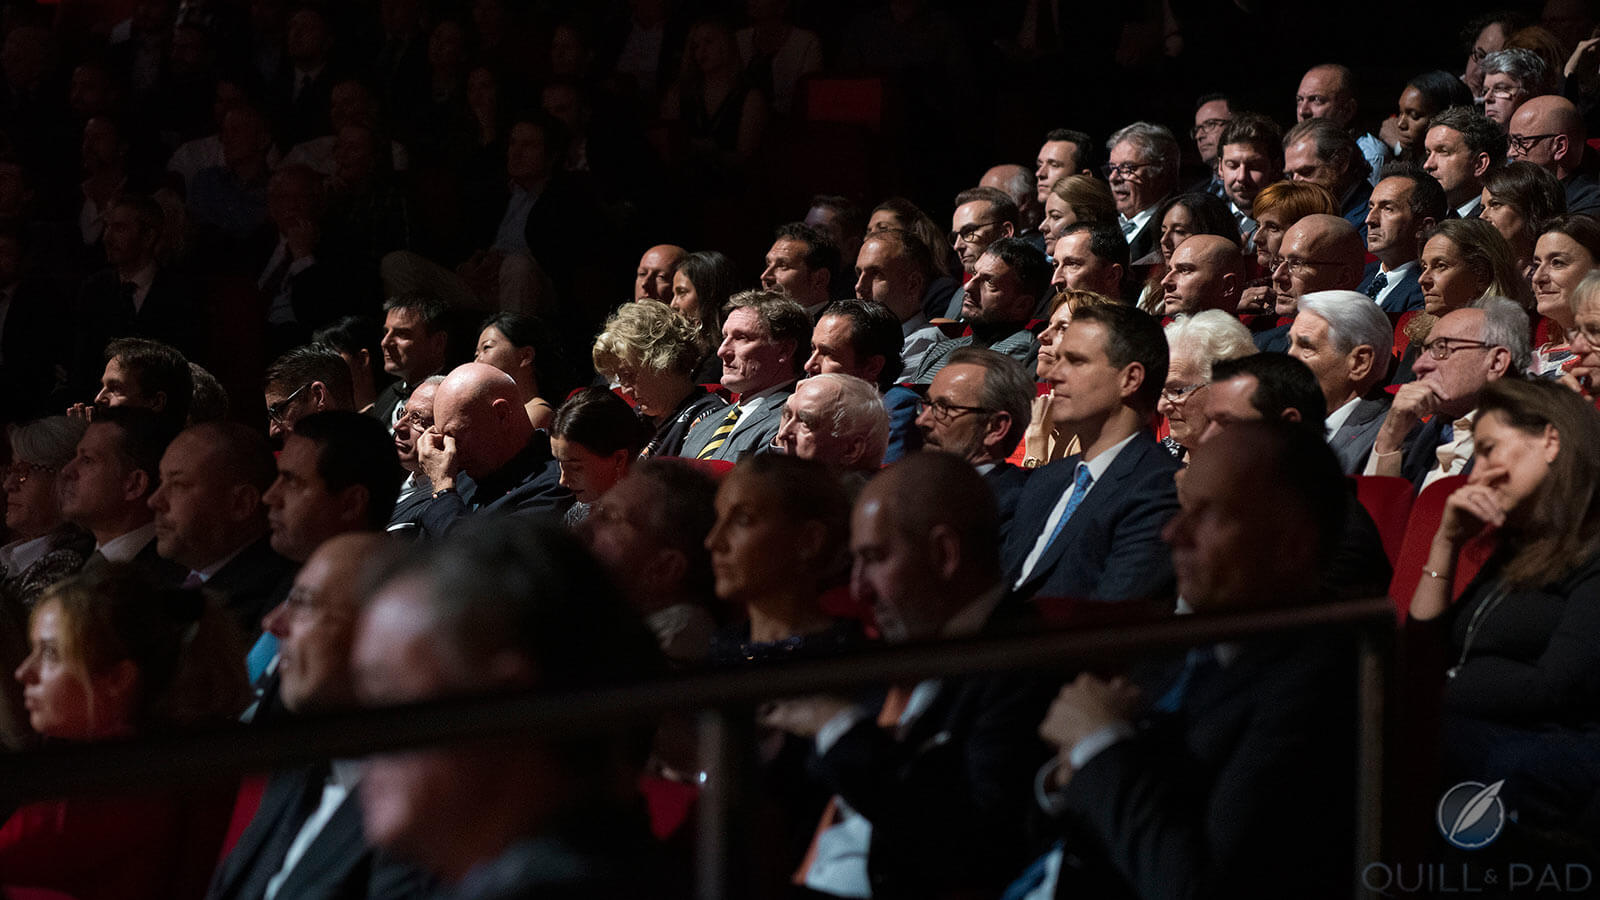 I’ll never forget it: Jean-Claude Biver (spotlighted at left with hand to face) during Aurel Bacs’ rousing introduction